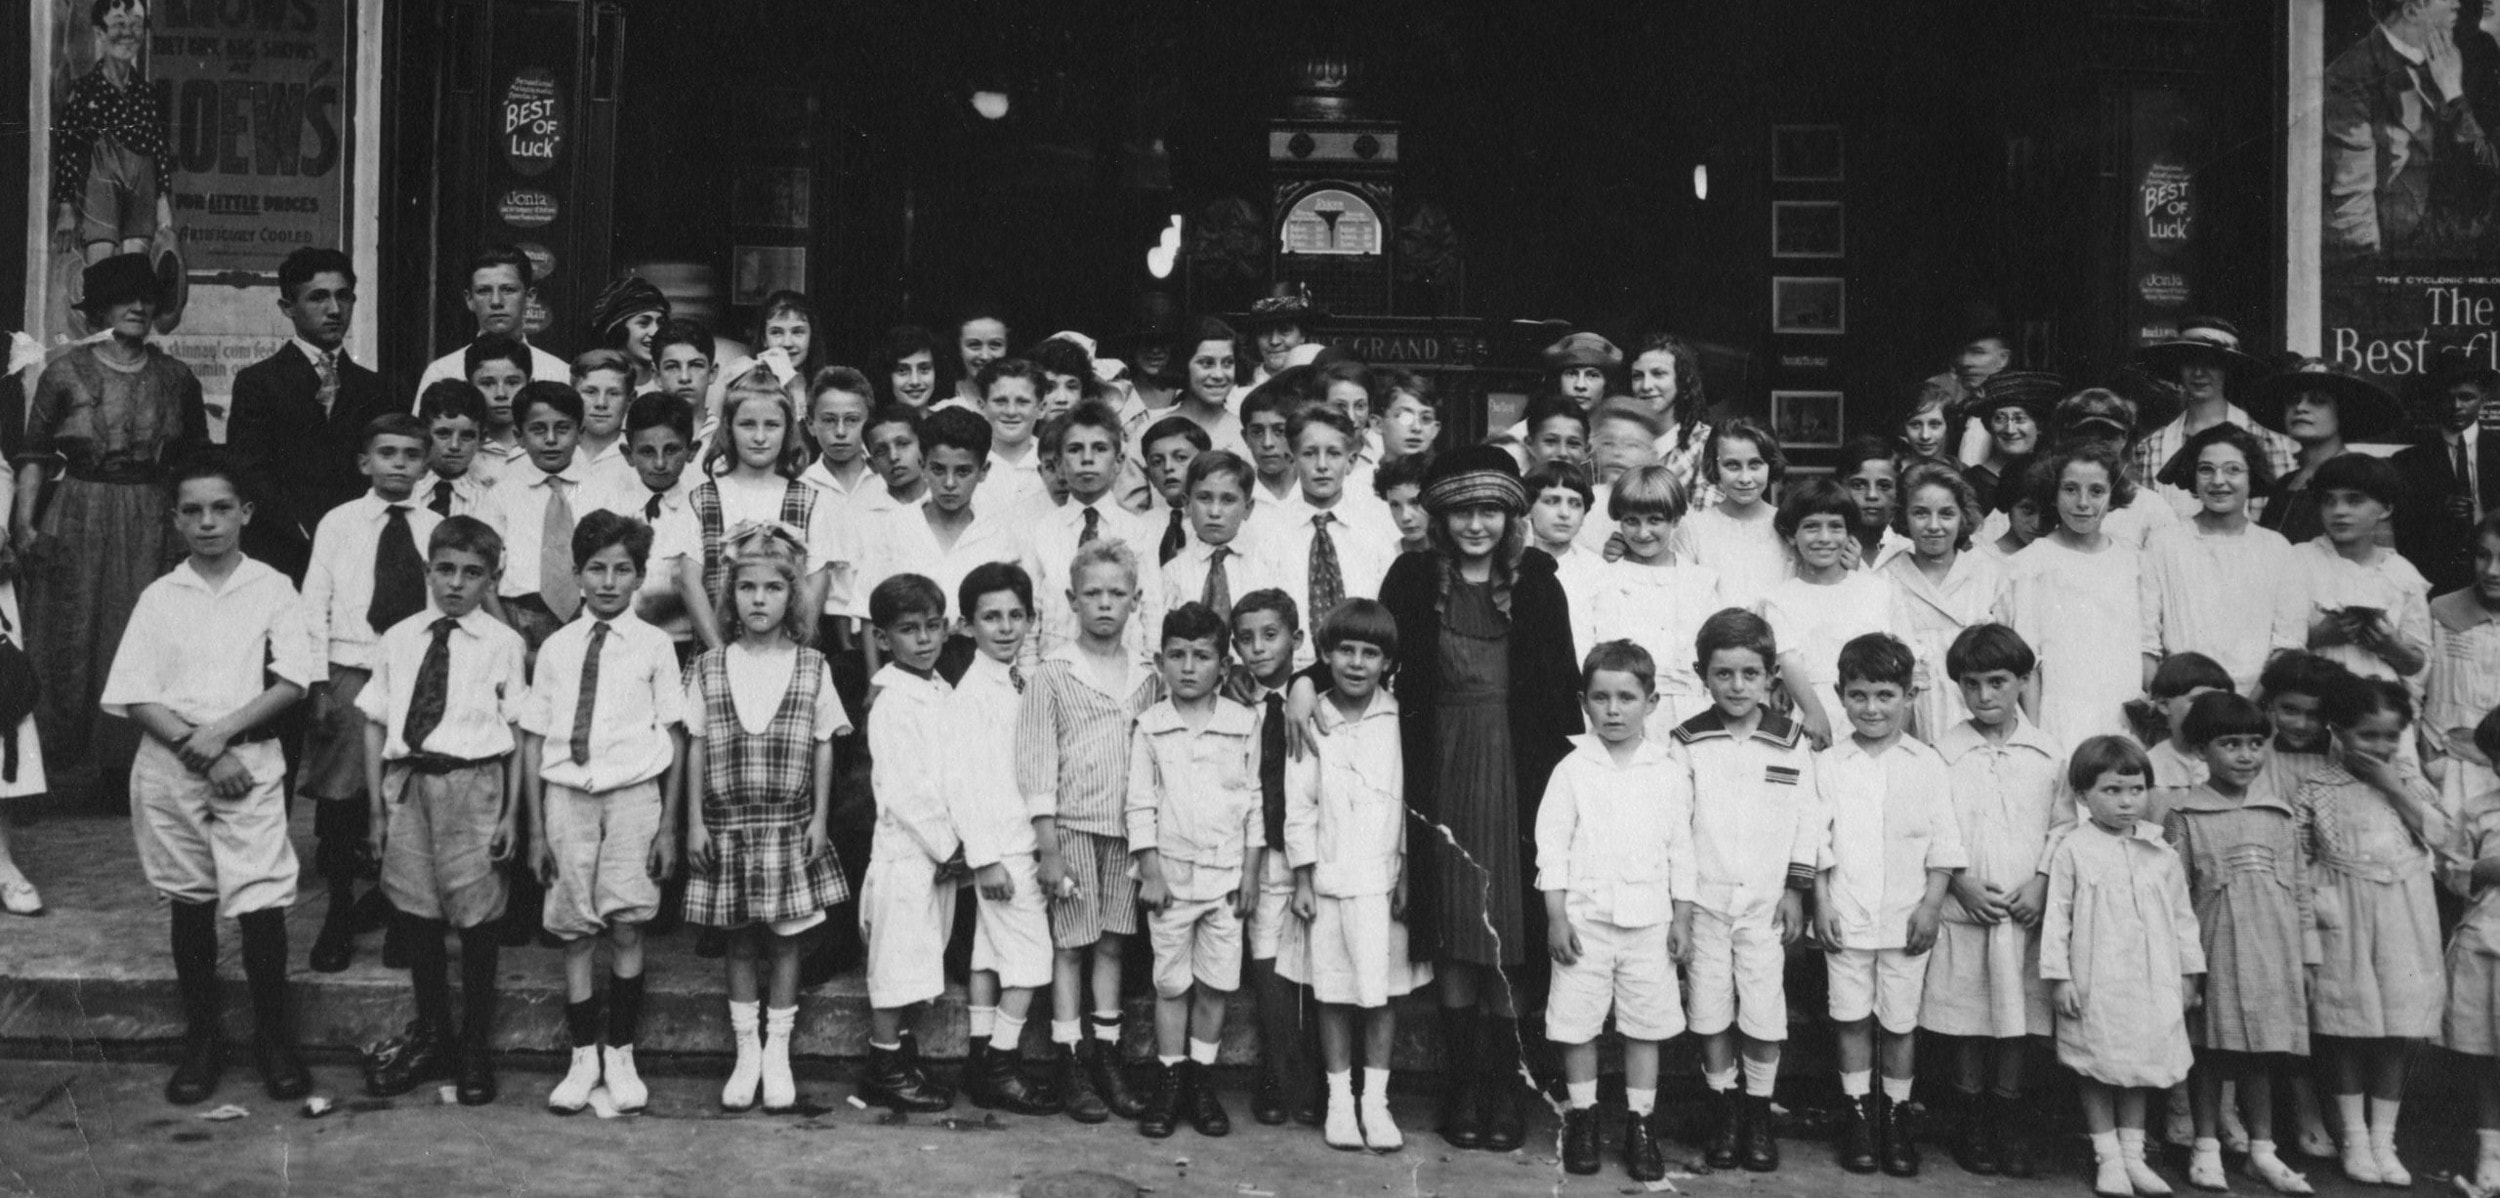 Children of the Hebrew Orphans’ Home going on a field trip
to the Loew’s Grand Theatre in Atlanta, circa 1928.